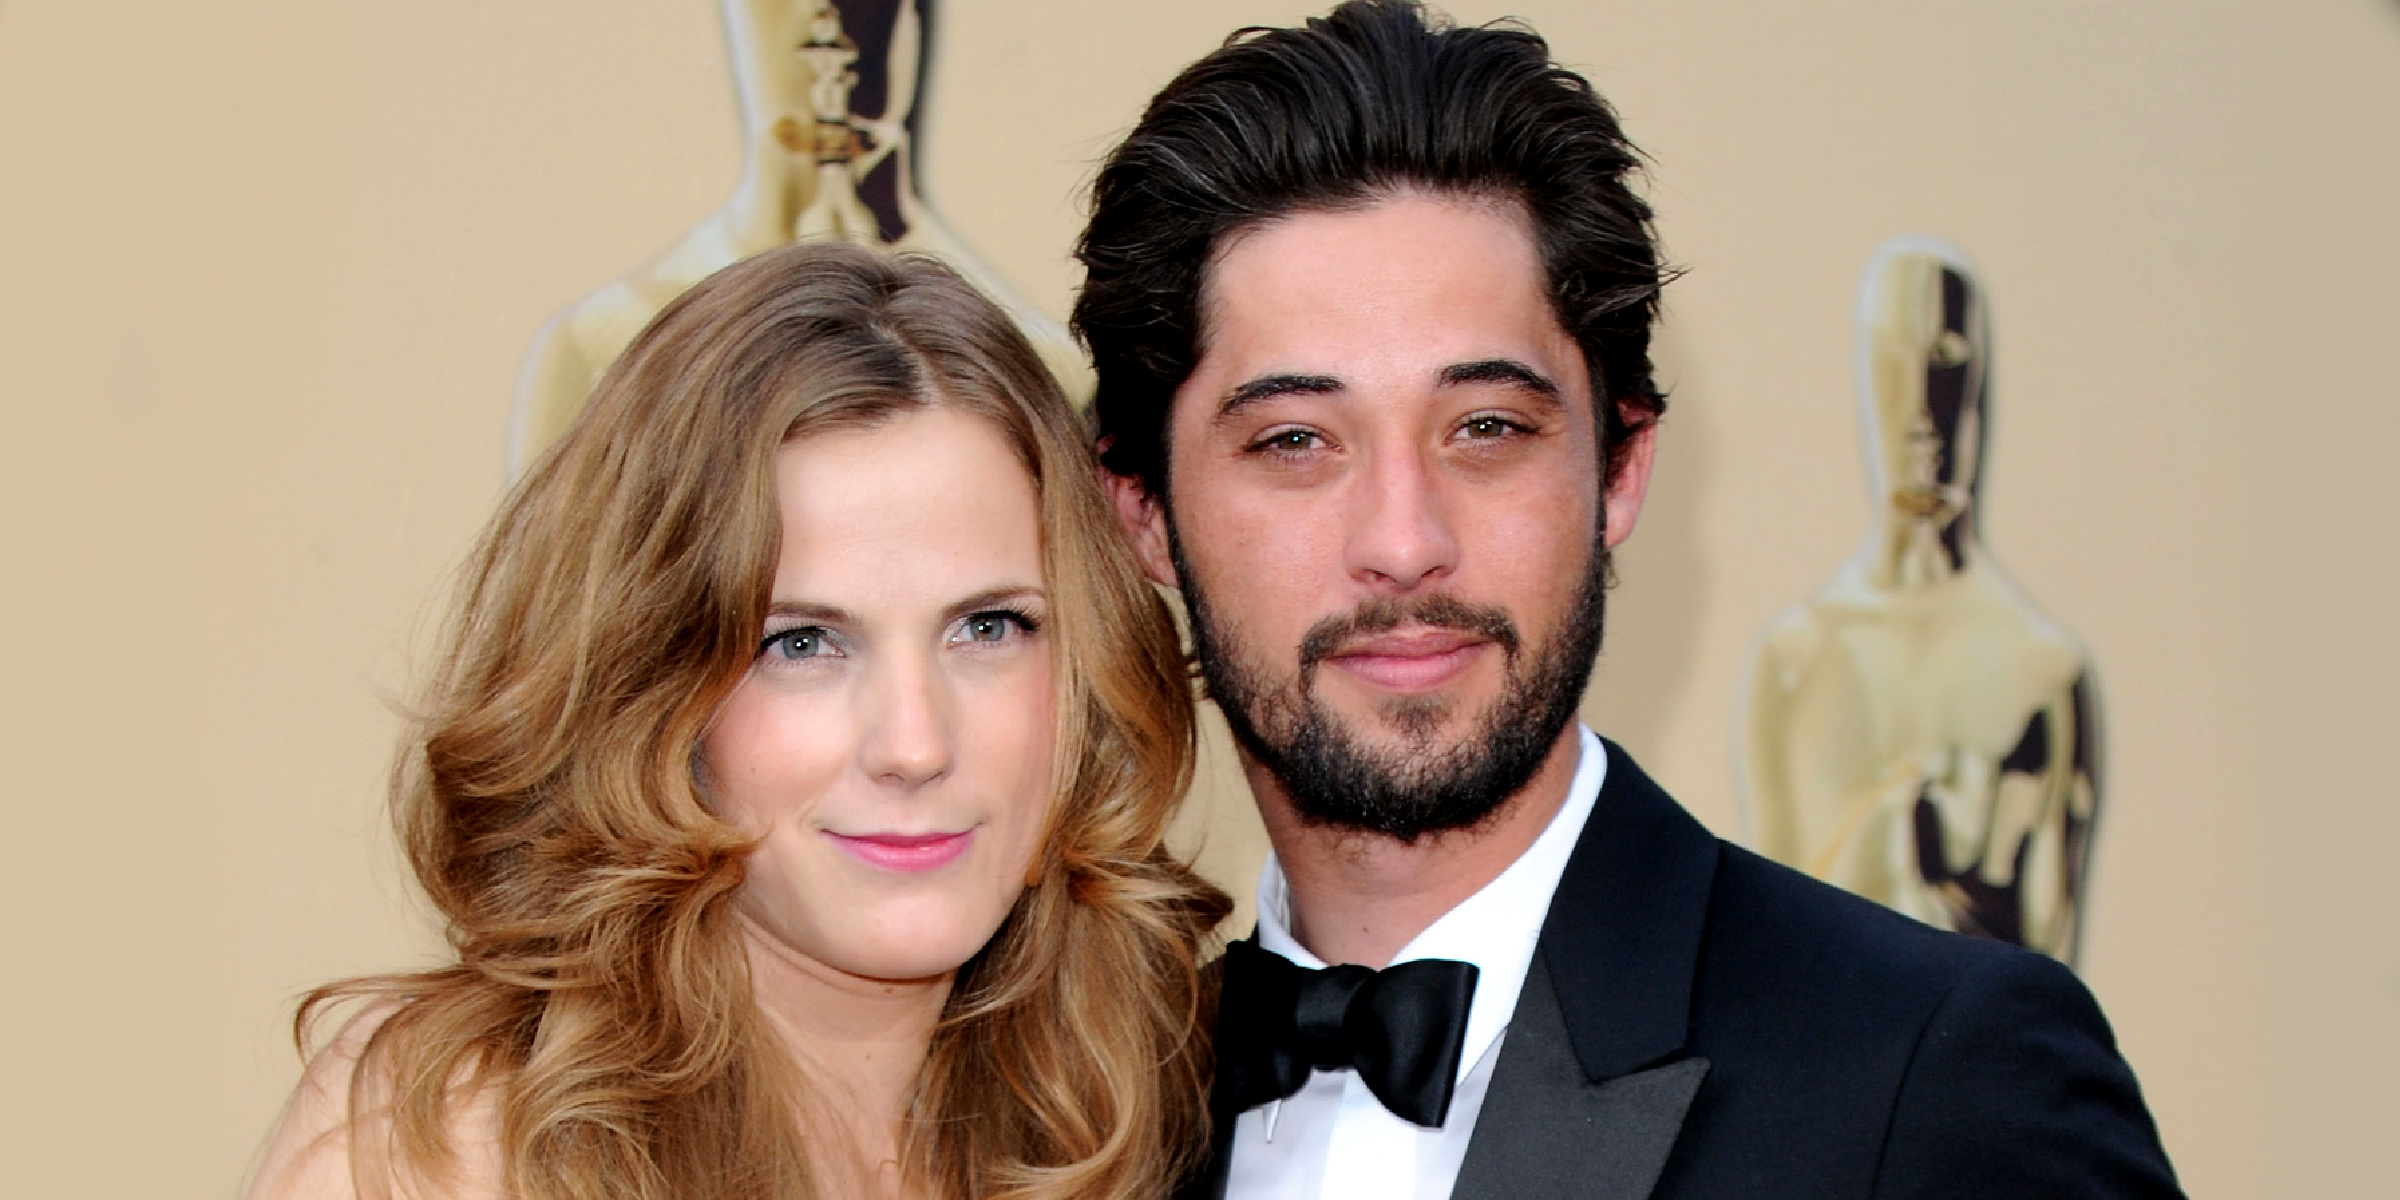 Anna Axster and Ryan Bingahm | Source: Getty Images